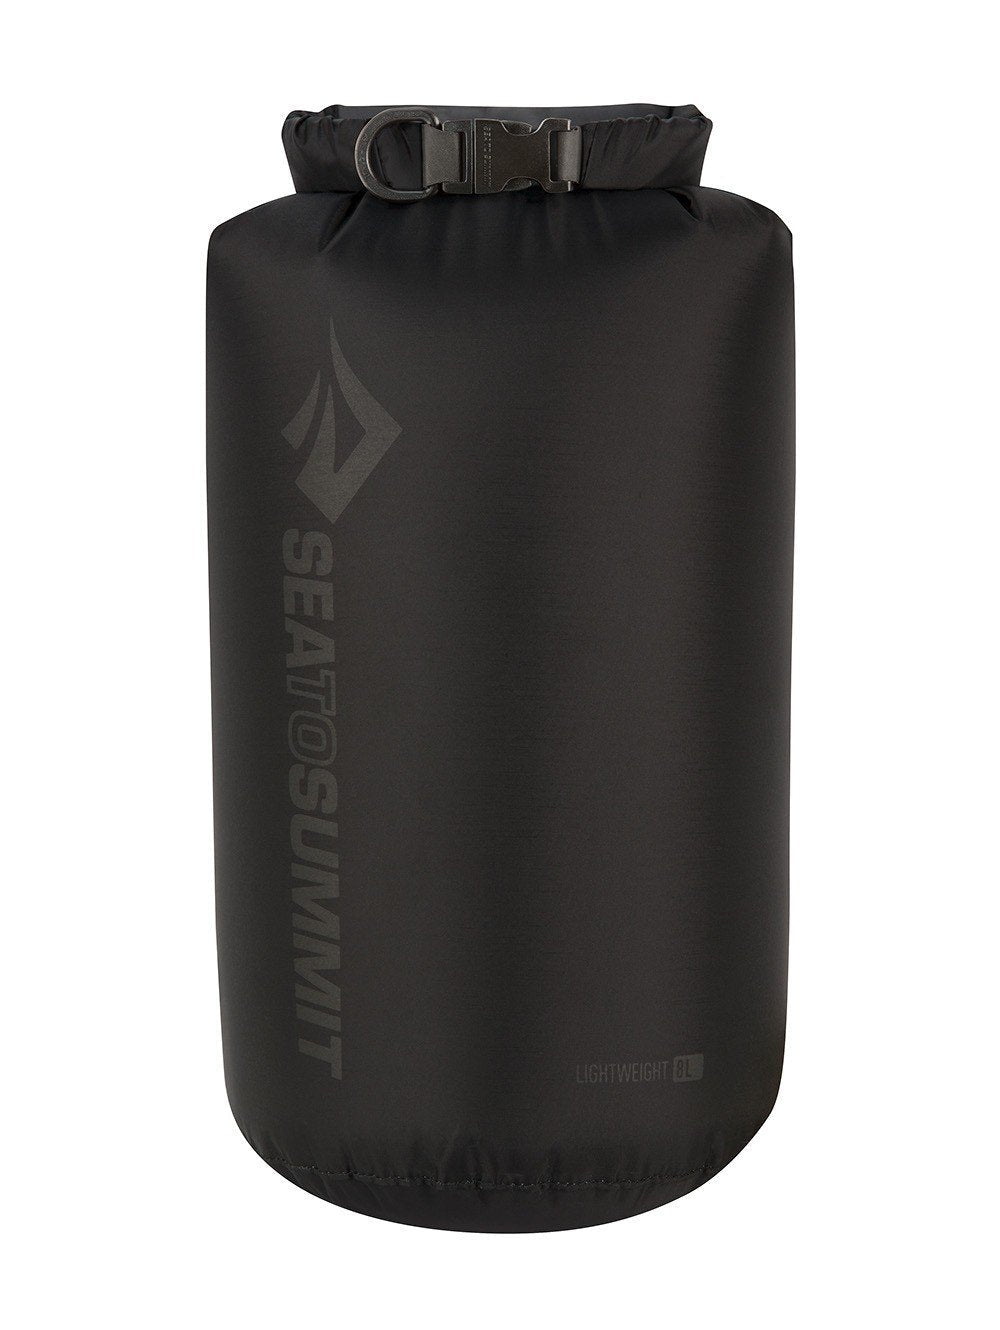 Sea To Summit Lightweight 70D 8 Litres Dry Sack Bags, Packs and Cases Sea To Summit Black Tactical Gear Supplier Tactical Distributors Australia